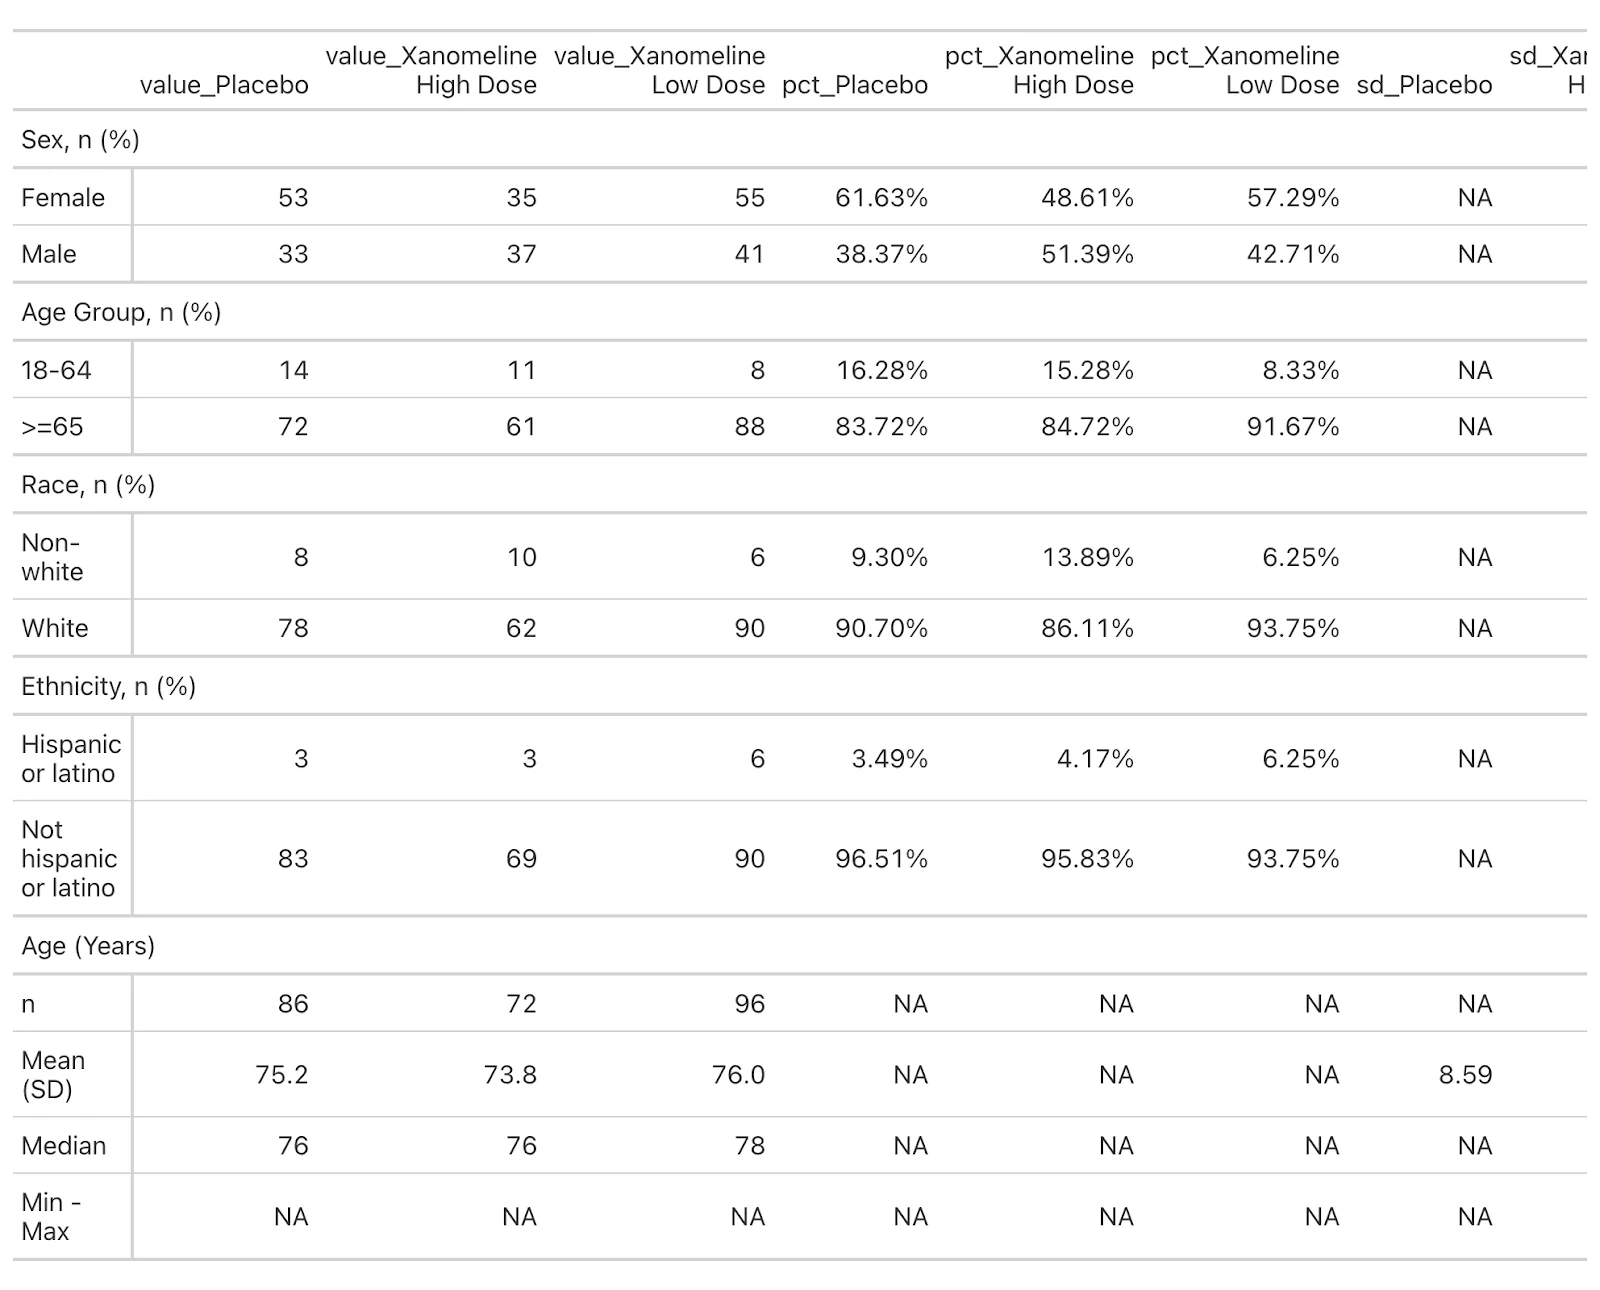 Detailed demographic data of a clinical trial, showing the distribution of participants by sex, age, race, and ethnicity across placebo and two dosage levels of Xanomeline.